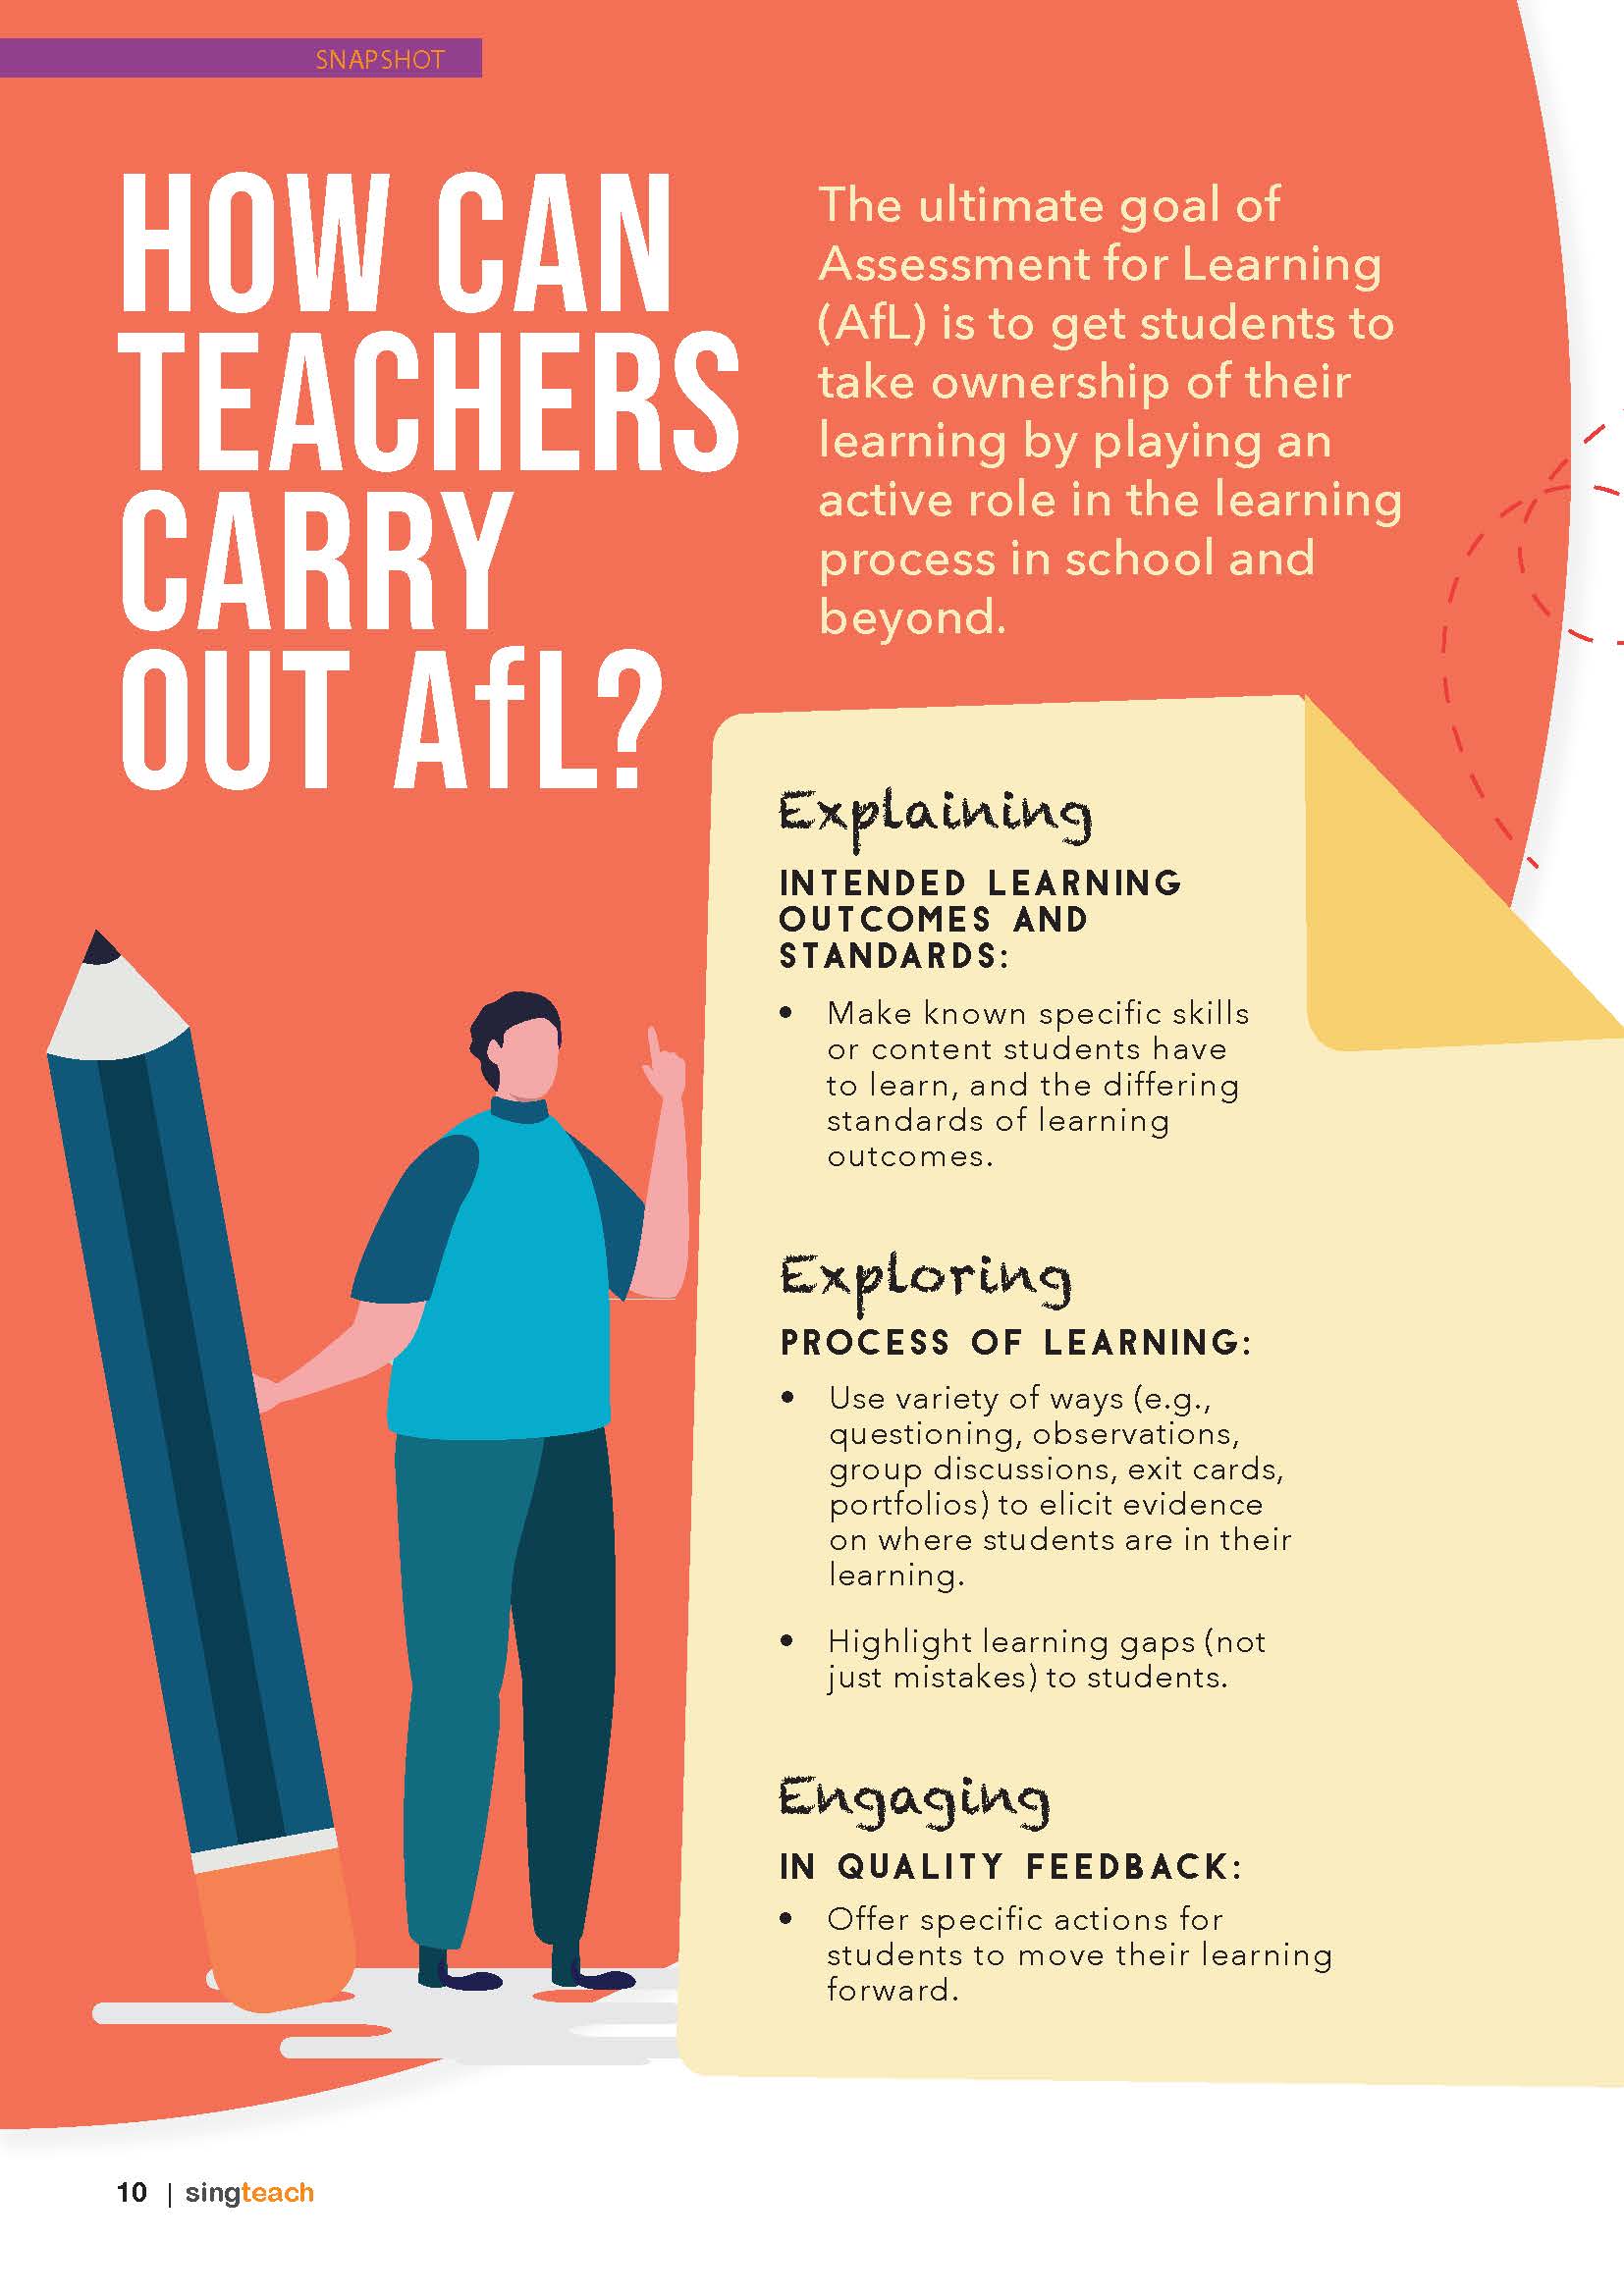 How Can Teachers Carry Out AfL?